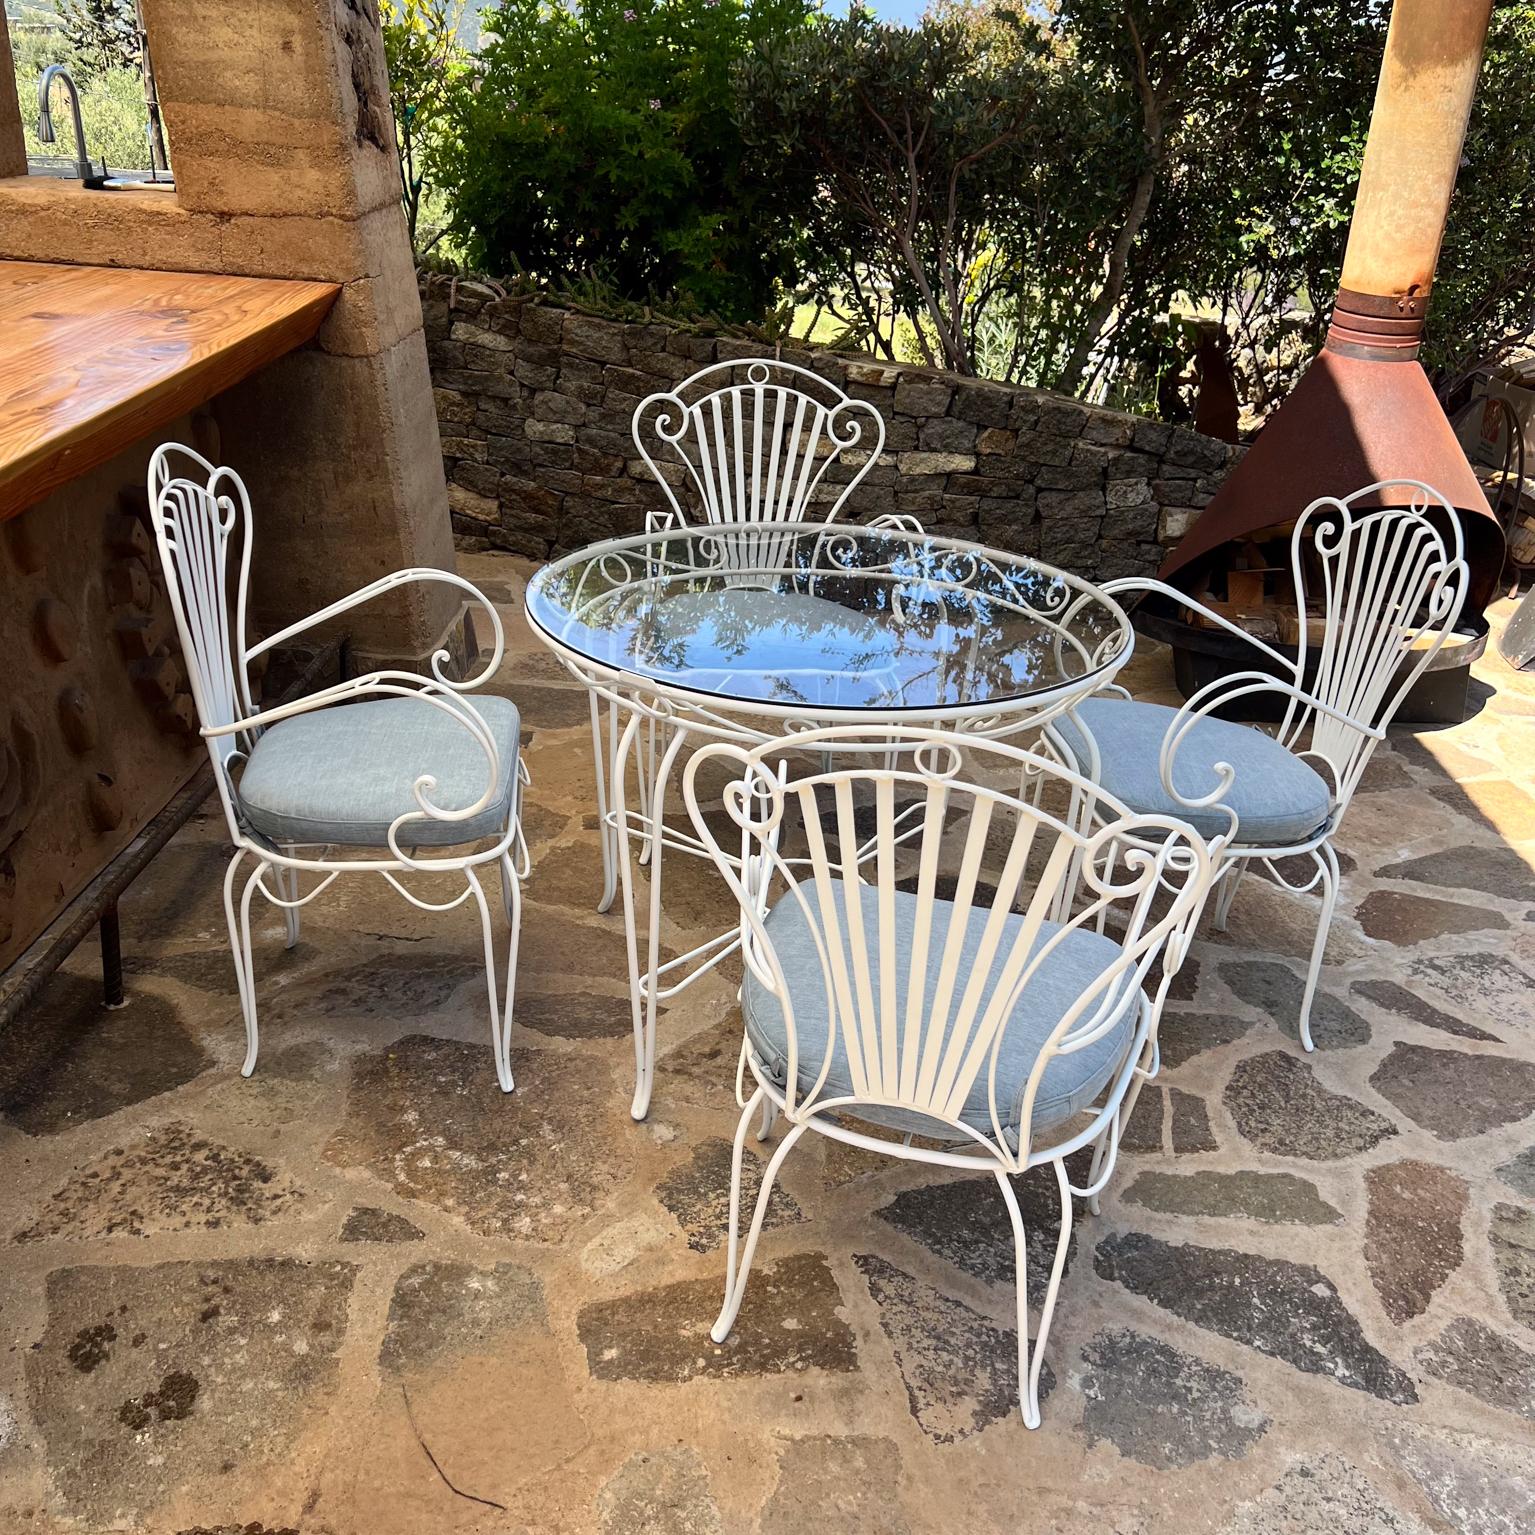 1950s French Sculptural Wrought Iron Patio Dining Set Restored In Good Condition For Sale In Chula Vista, CA